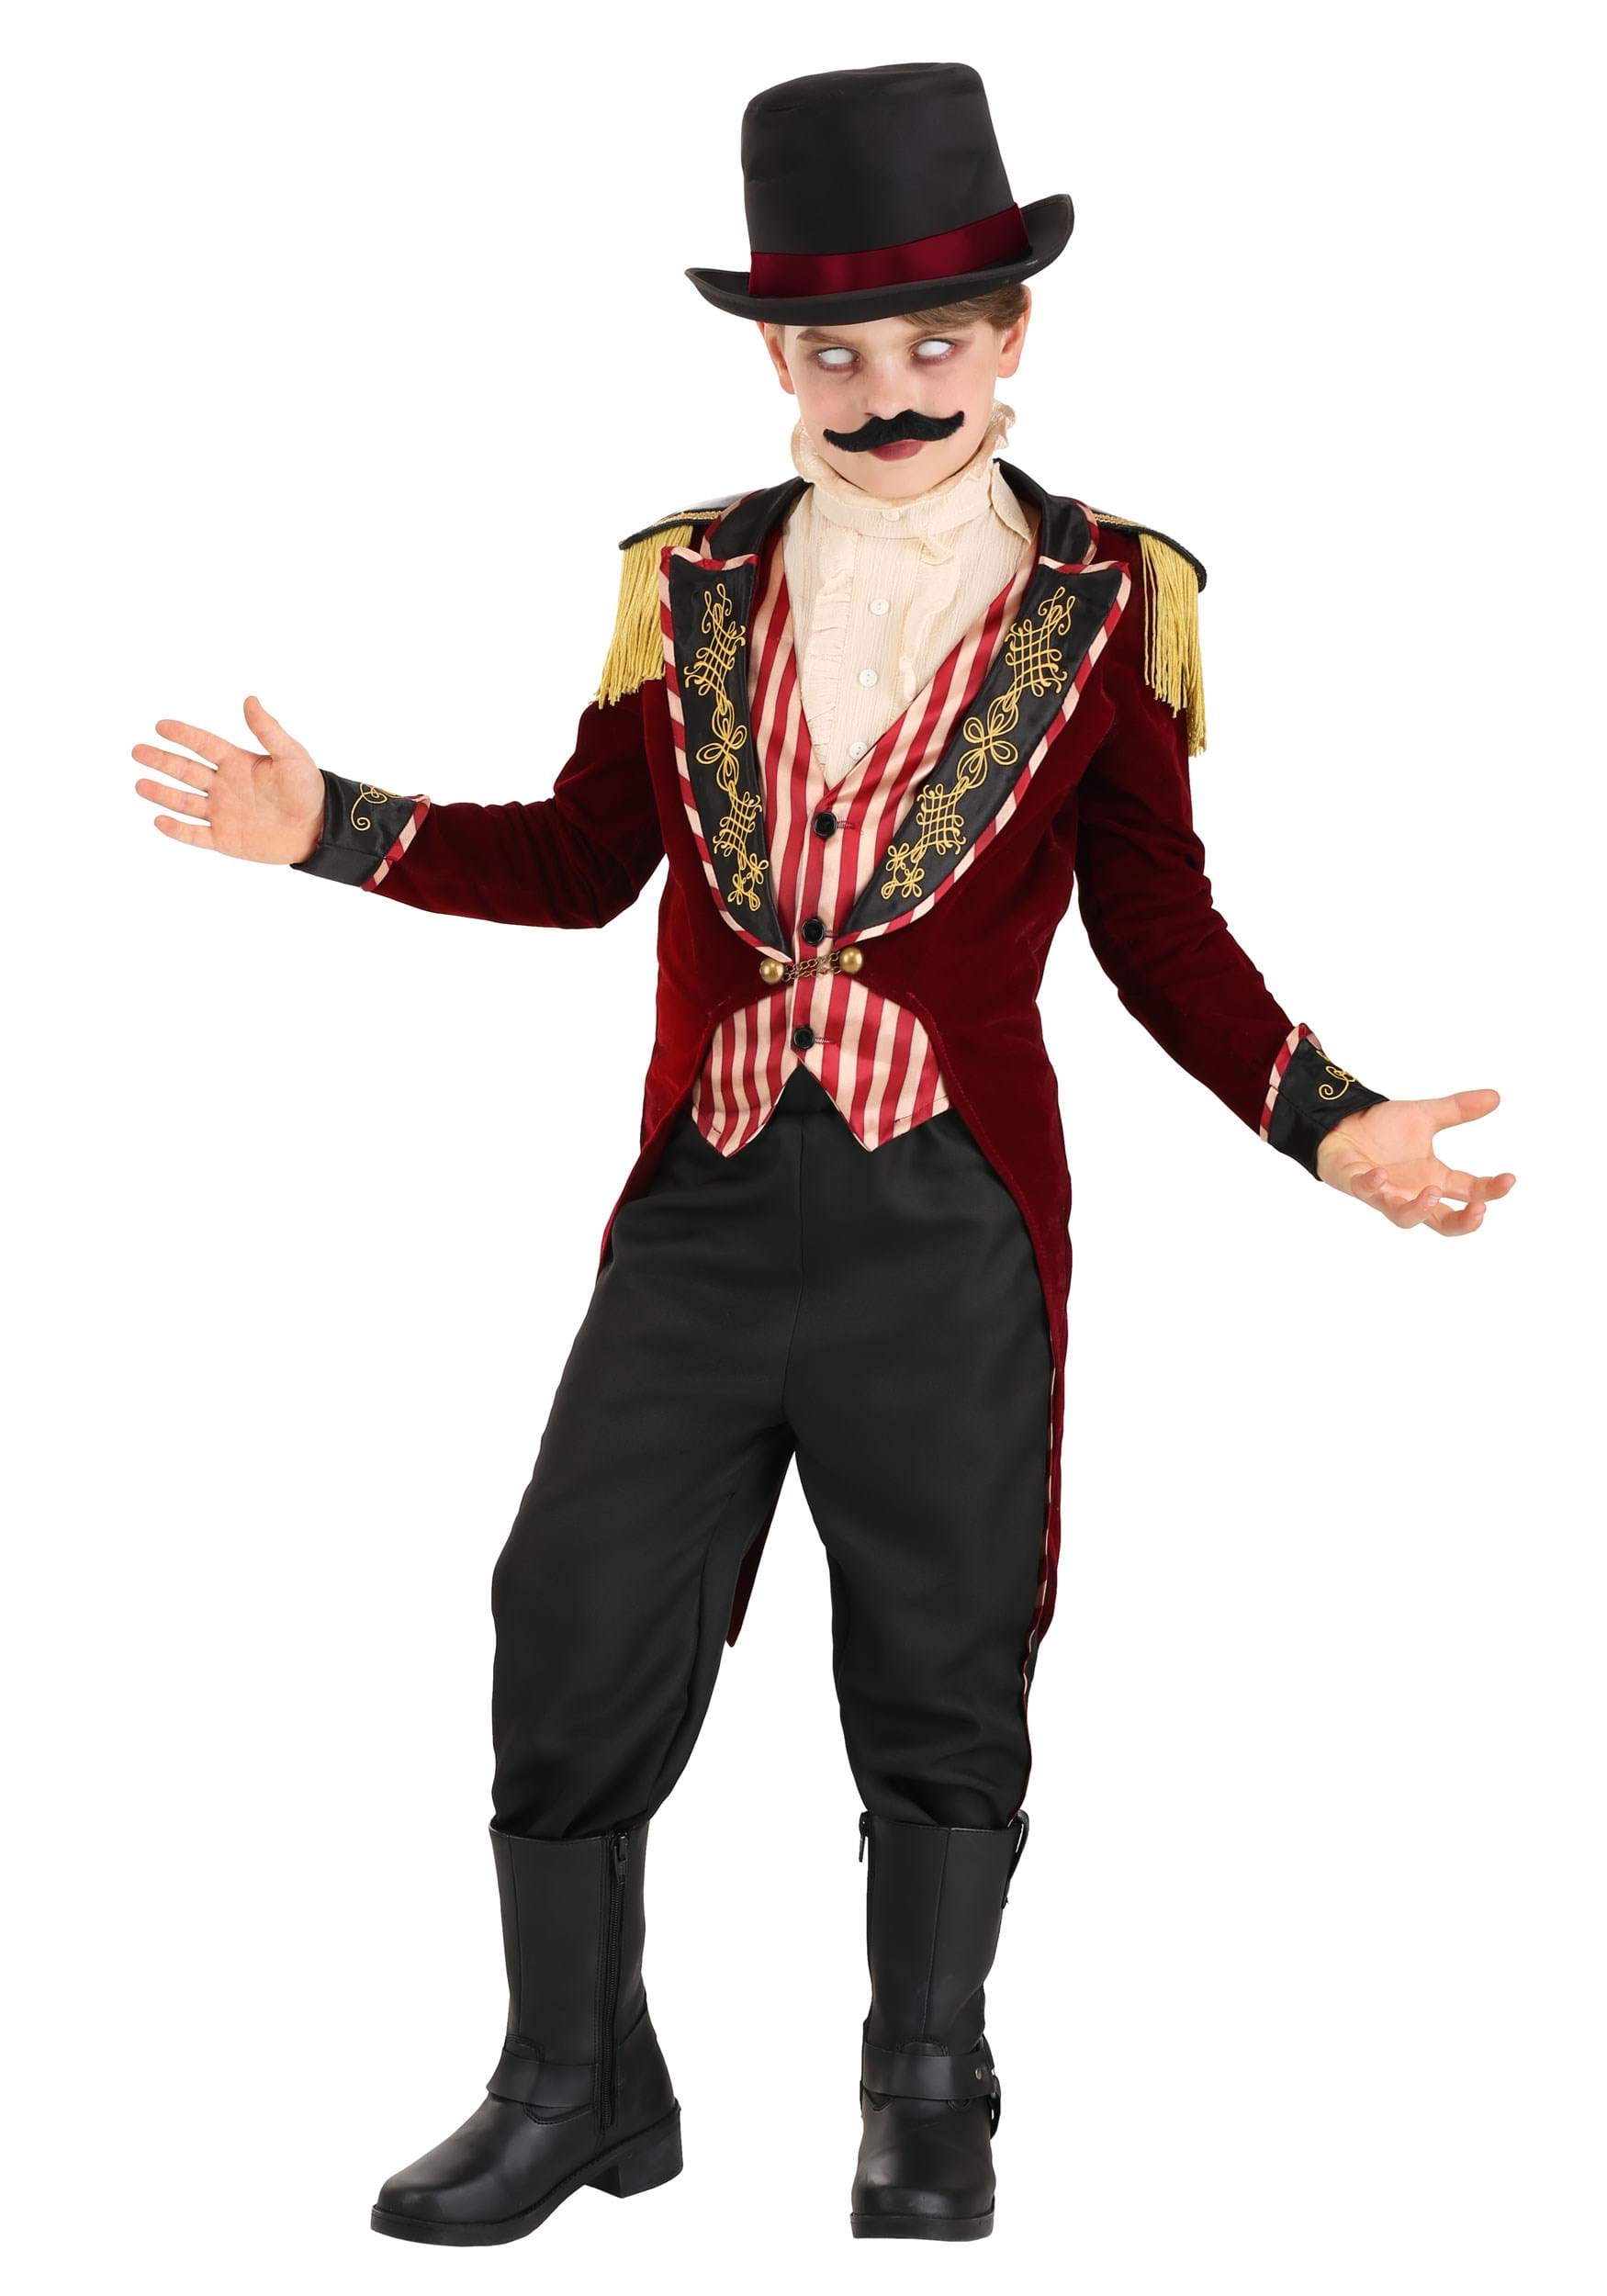 Photos - Fancy Dress FUN Costumes Scary Boy's Ringmaster Costume Black/Red/Brown